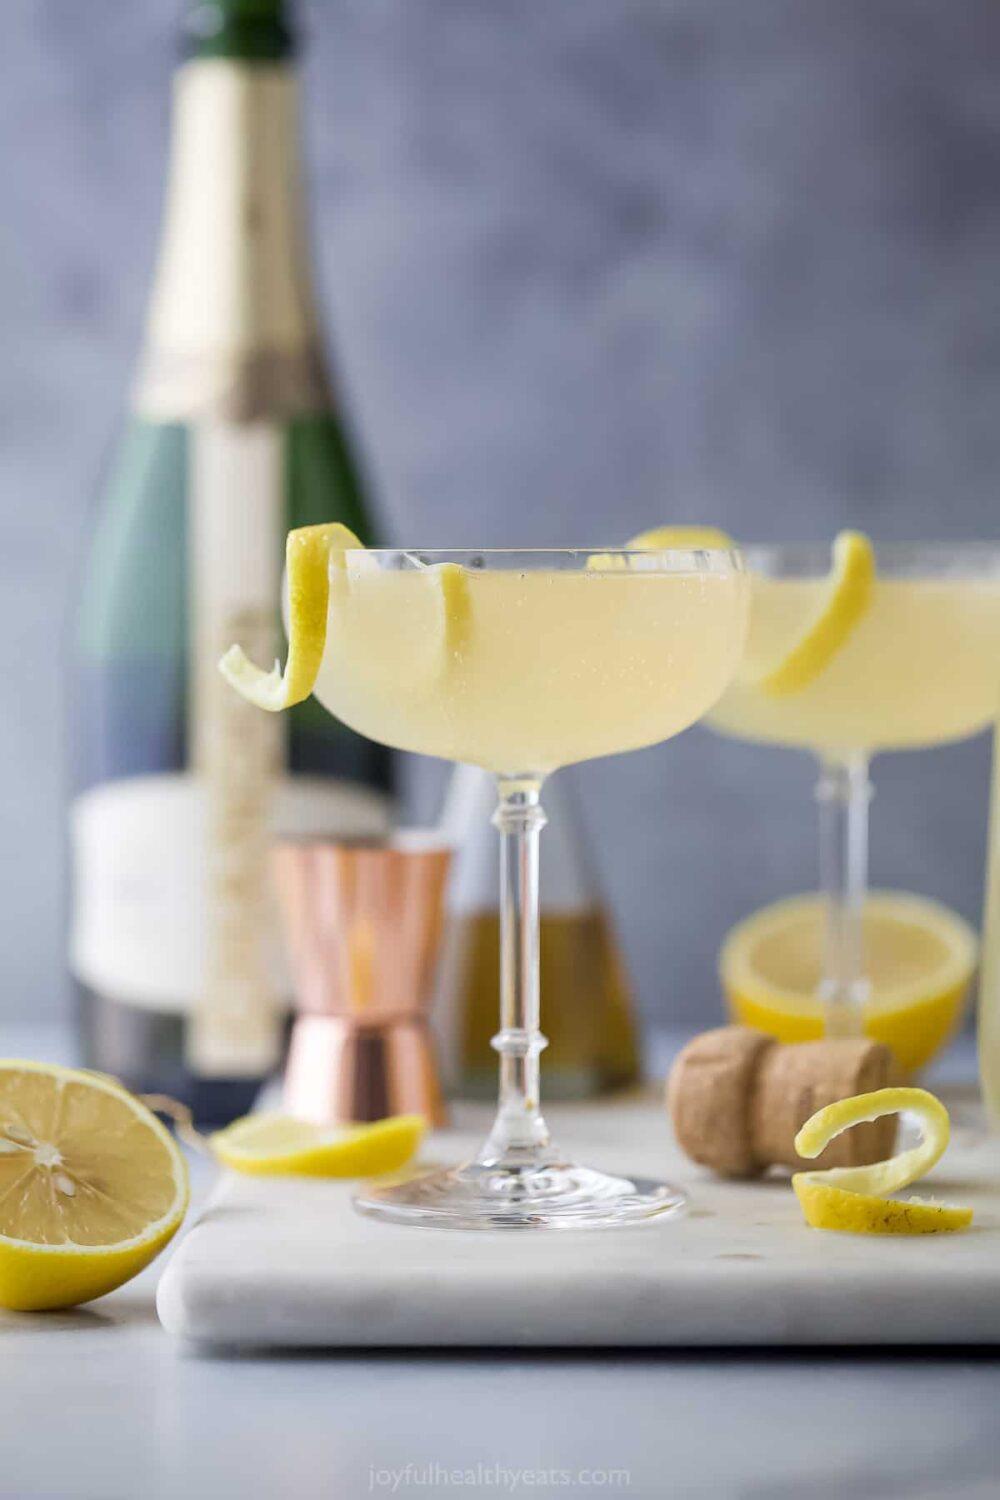 French 75